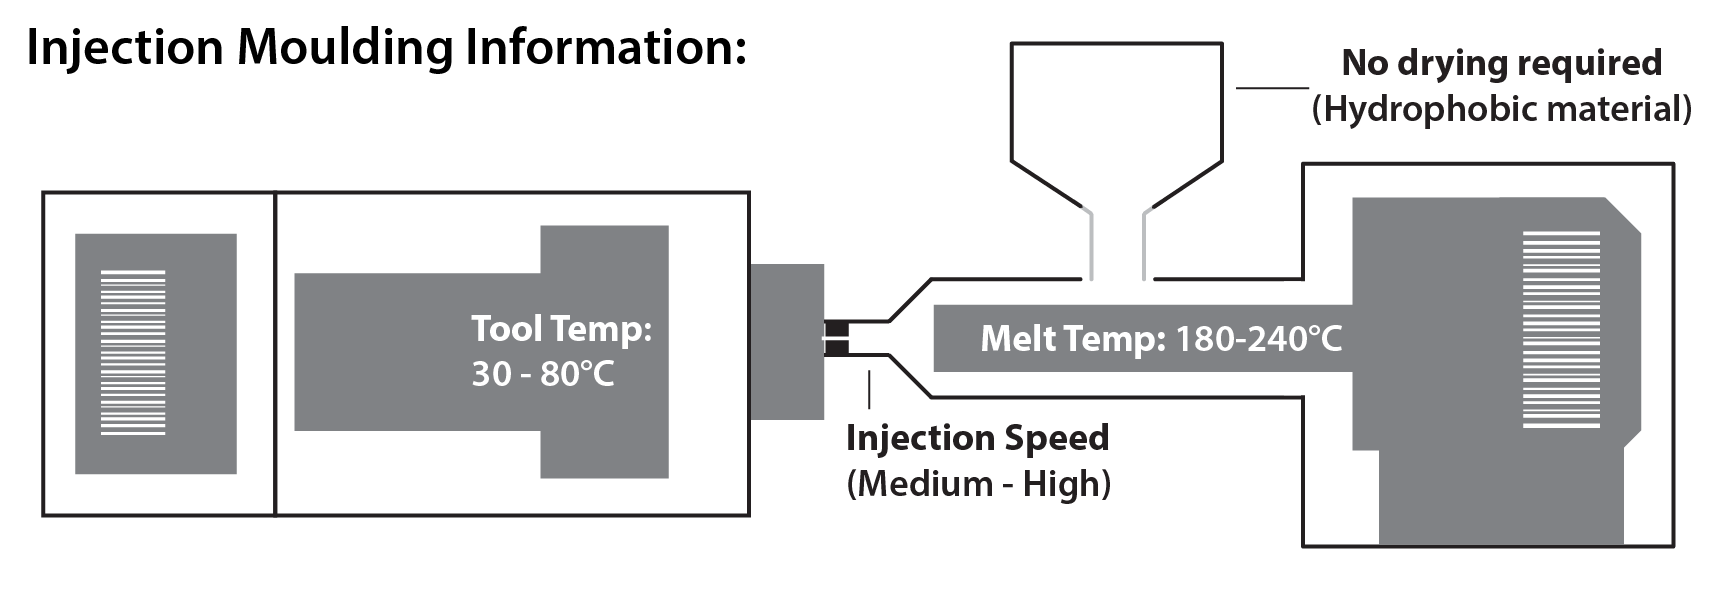 A diagram showing the injection moulding information